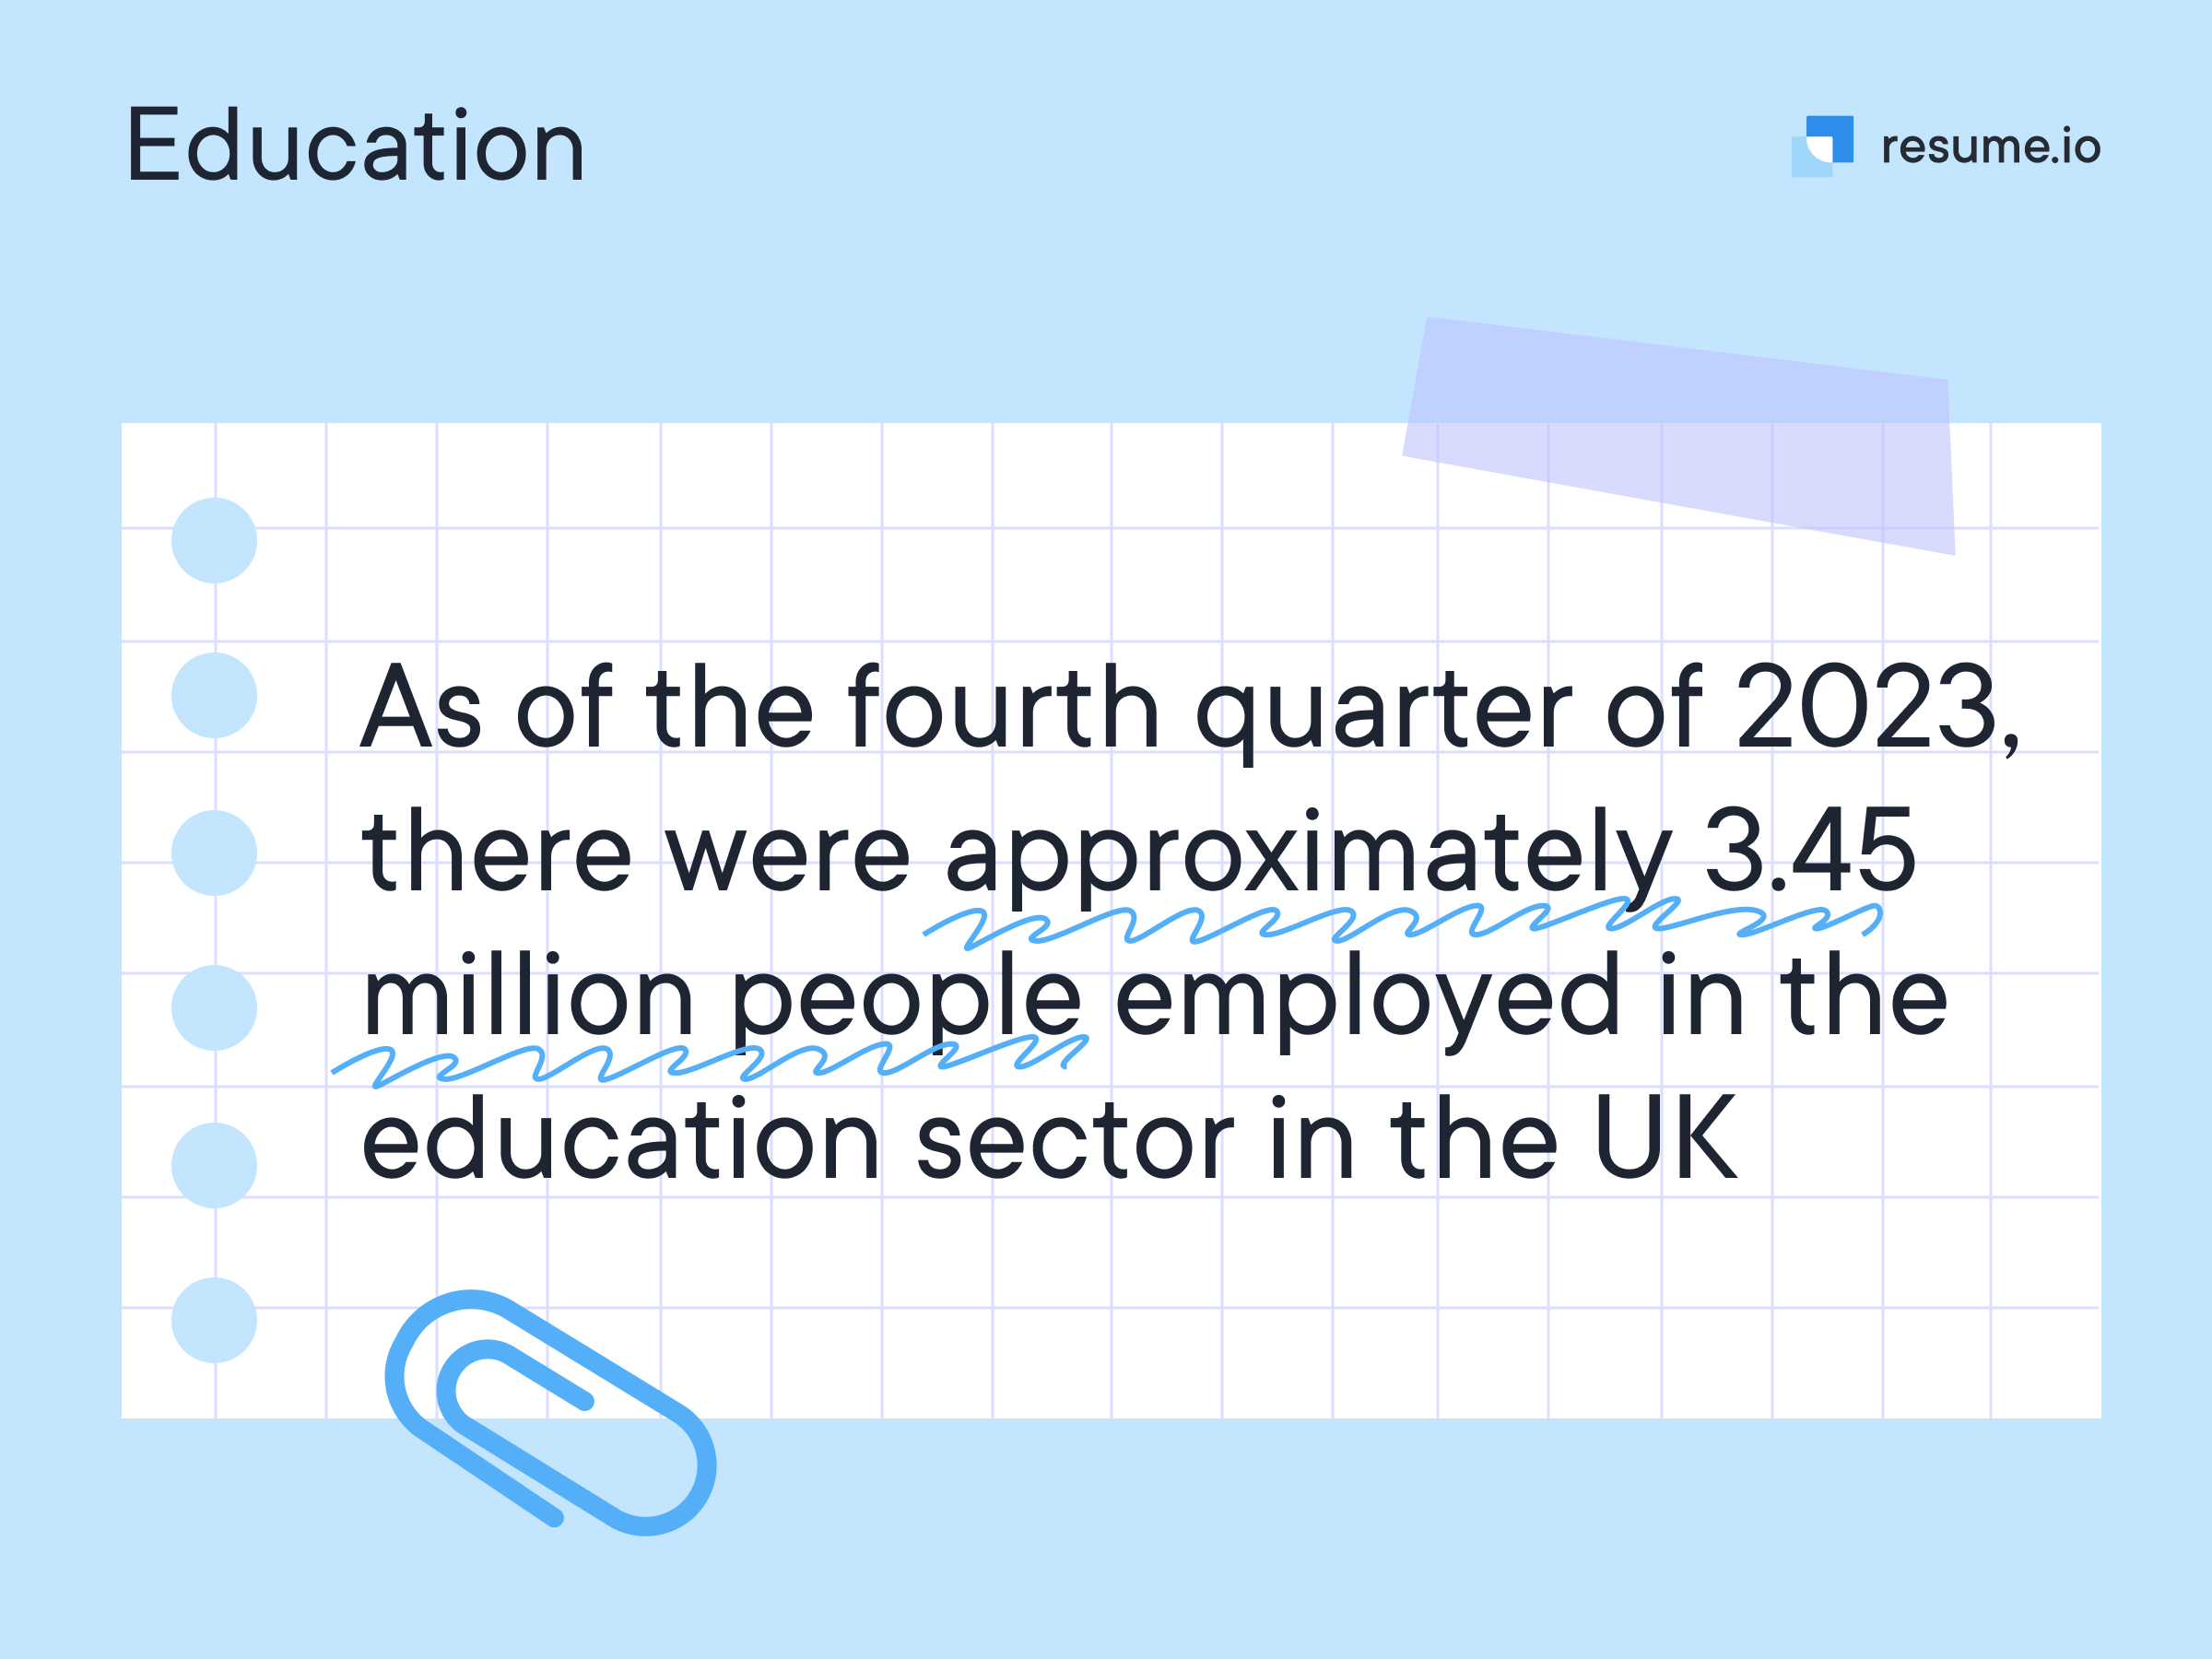 3.45 million people are employed in the education sector in the UK